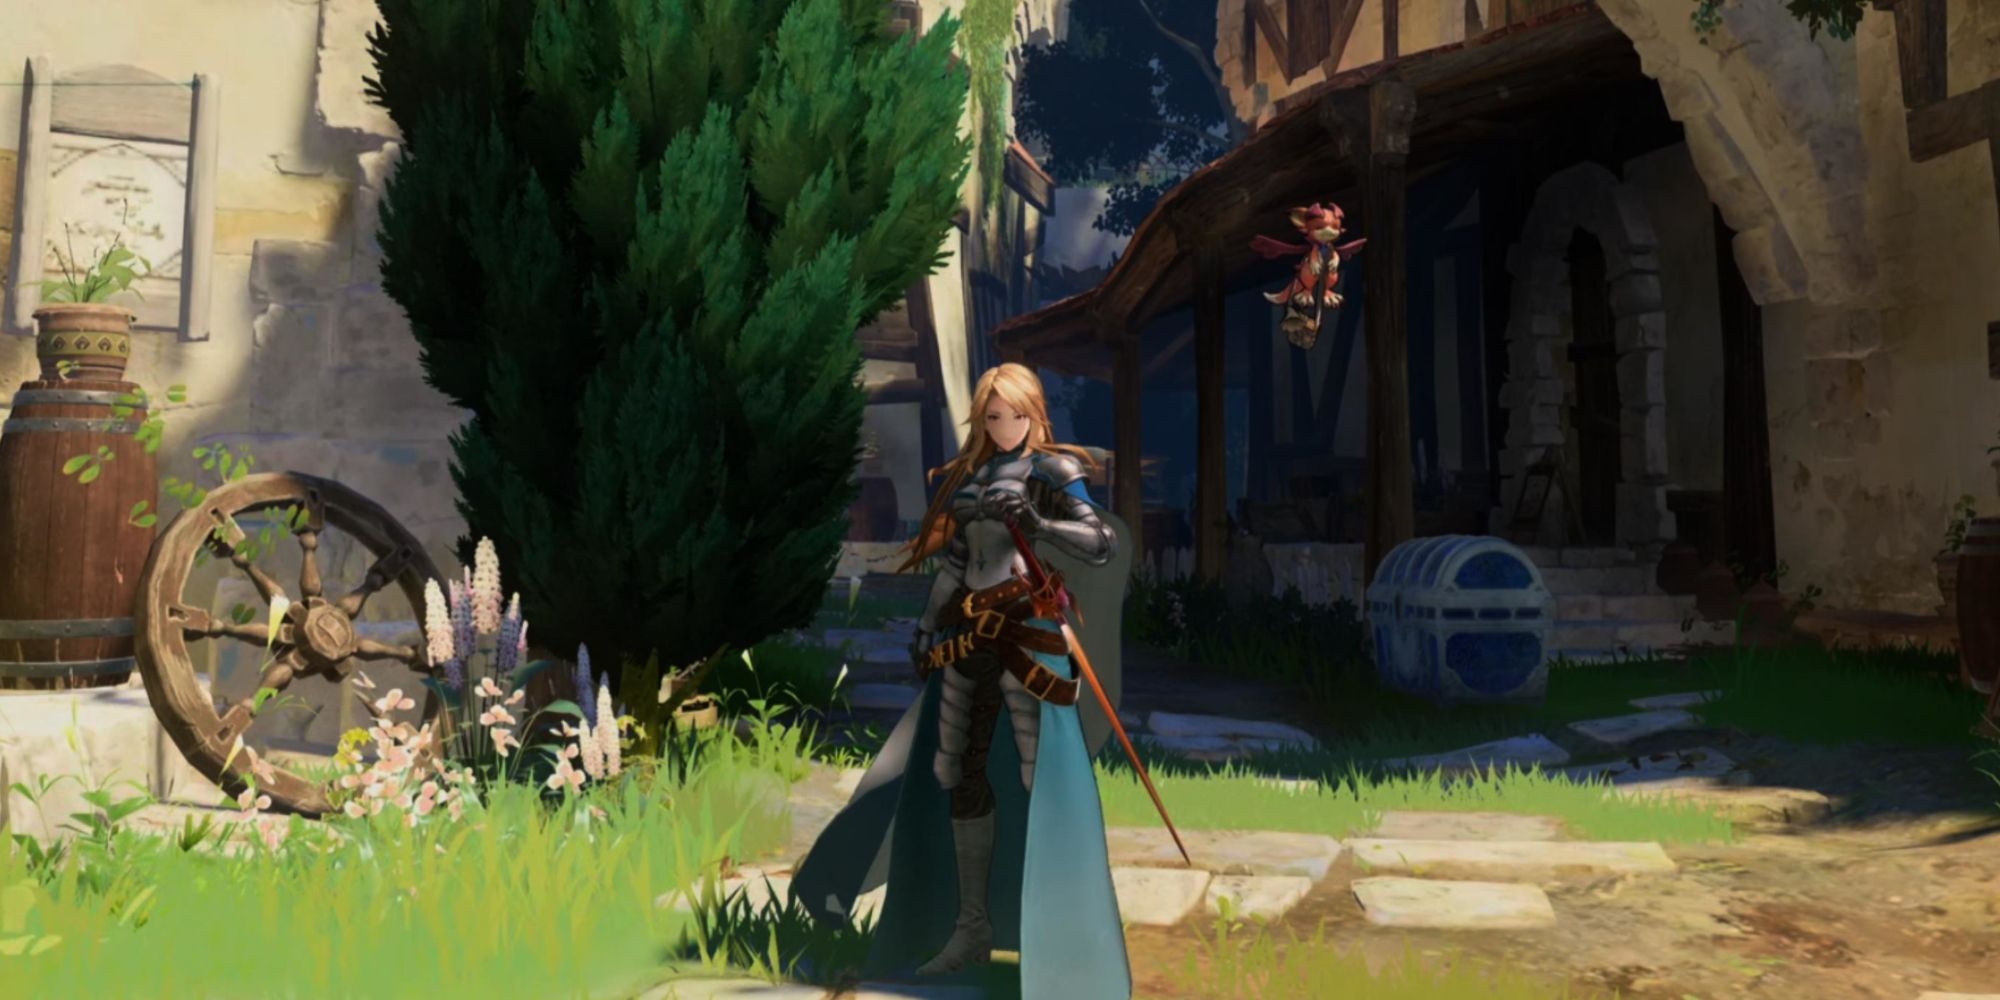 Granblue Fantasy: Relink – How To Get The Silver, Gold & Whitewing Keys